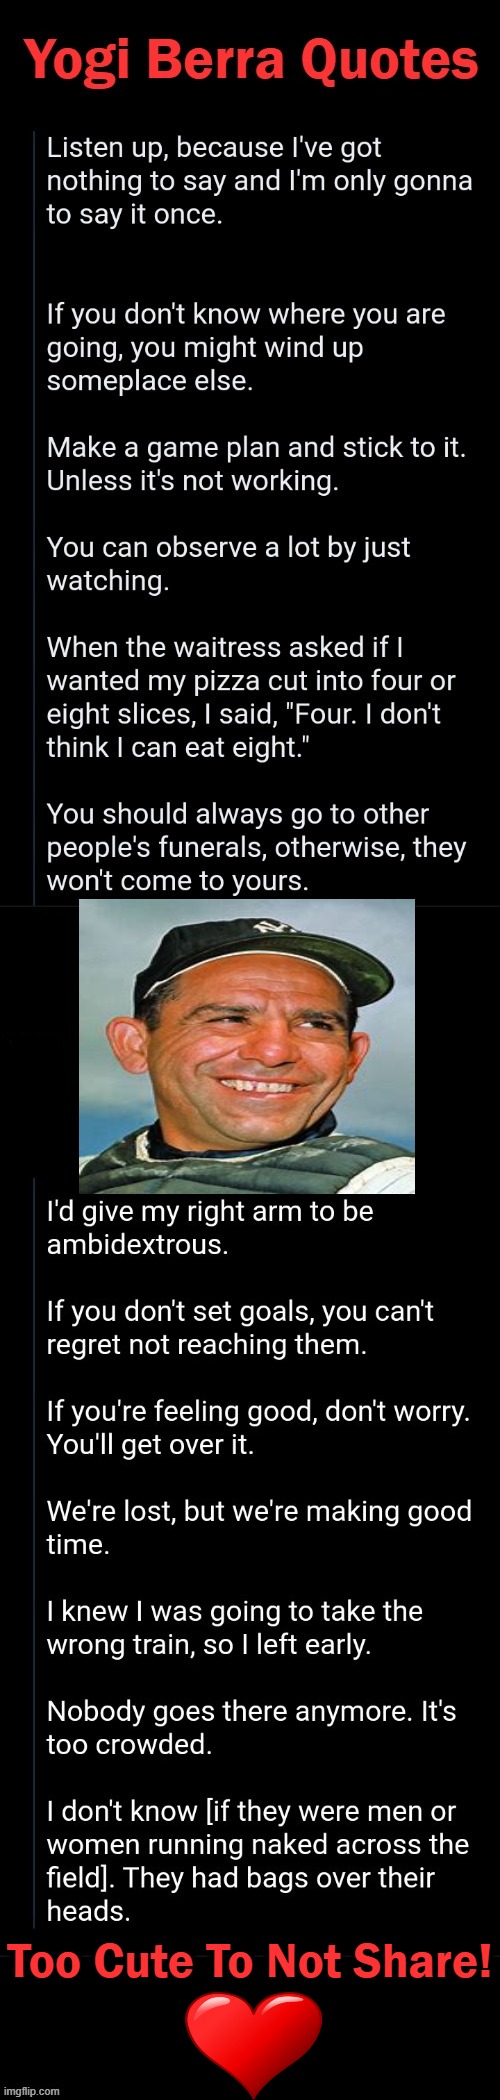 Timeless Humor | Too Cute To Not Share! | image tagged in fun,yogi berra,humor,imgflip humor,funny,timeless | made w/ Imgflip meme maker